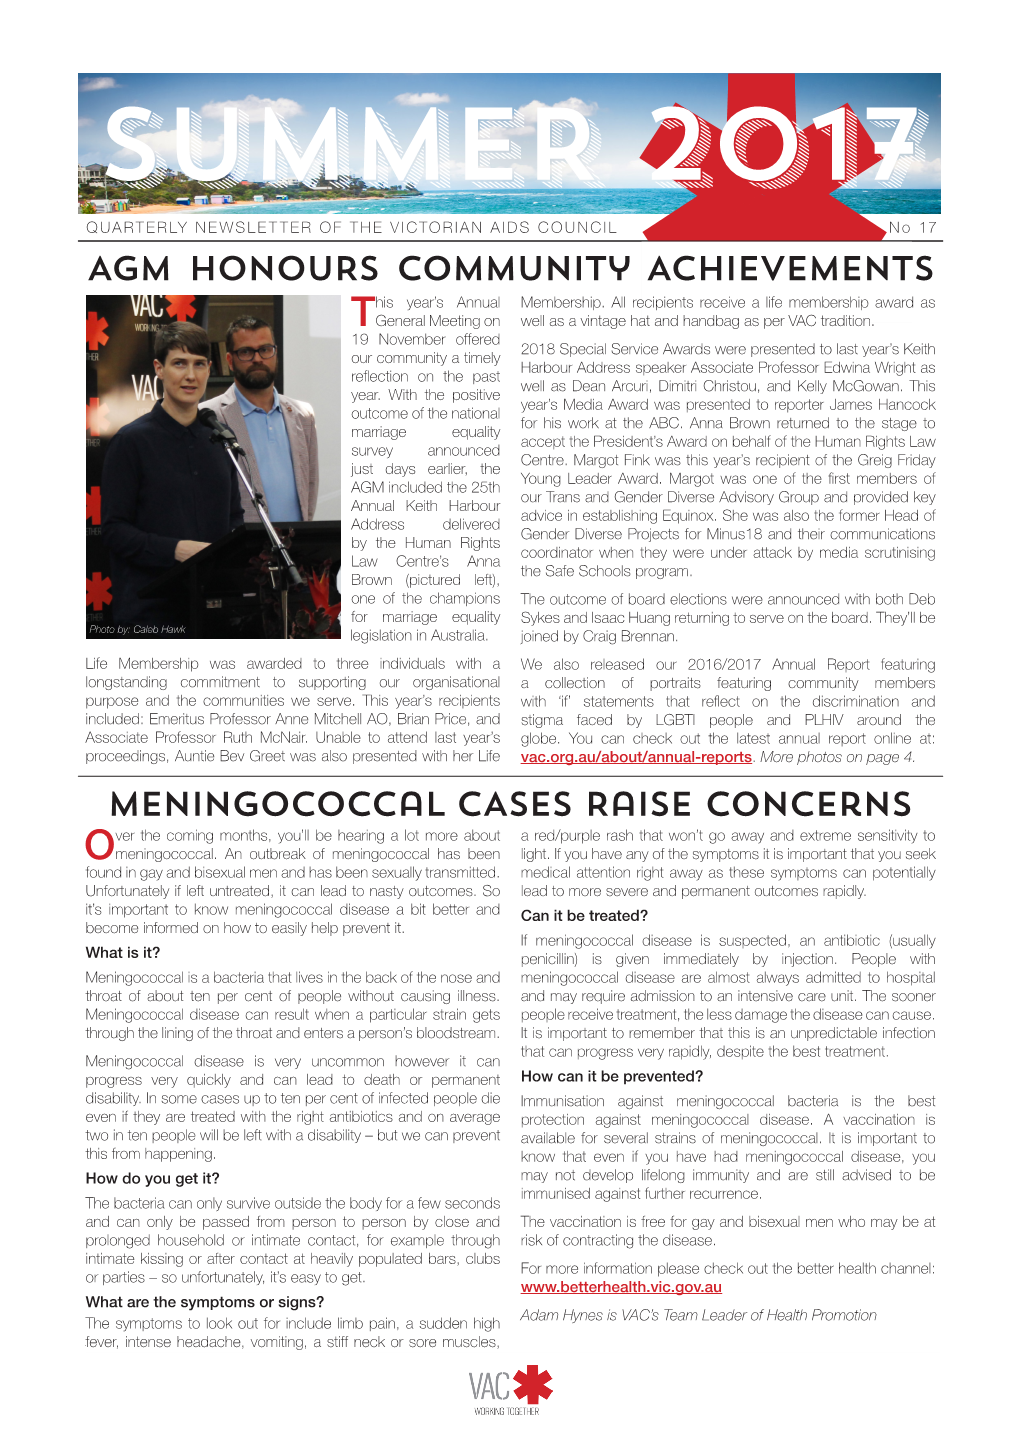 SUMMER 2017 QUARTERLY NEWSLETTER of the VICTORIAN AIDS COUNCIL No 17 AGM HONOURS Community ACHIEVEMENTS His Year’S Annual Membership